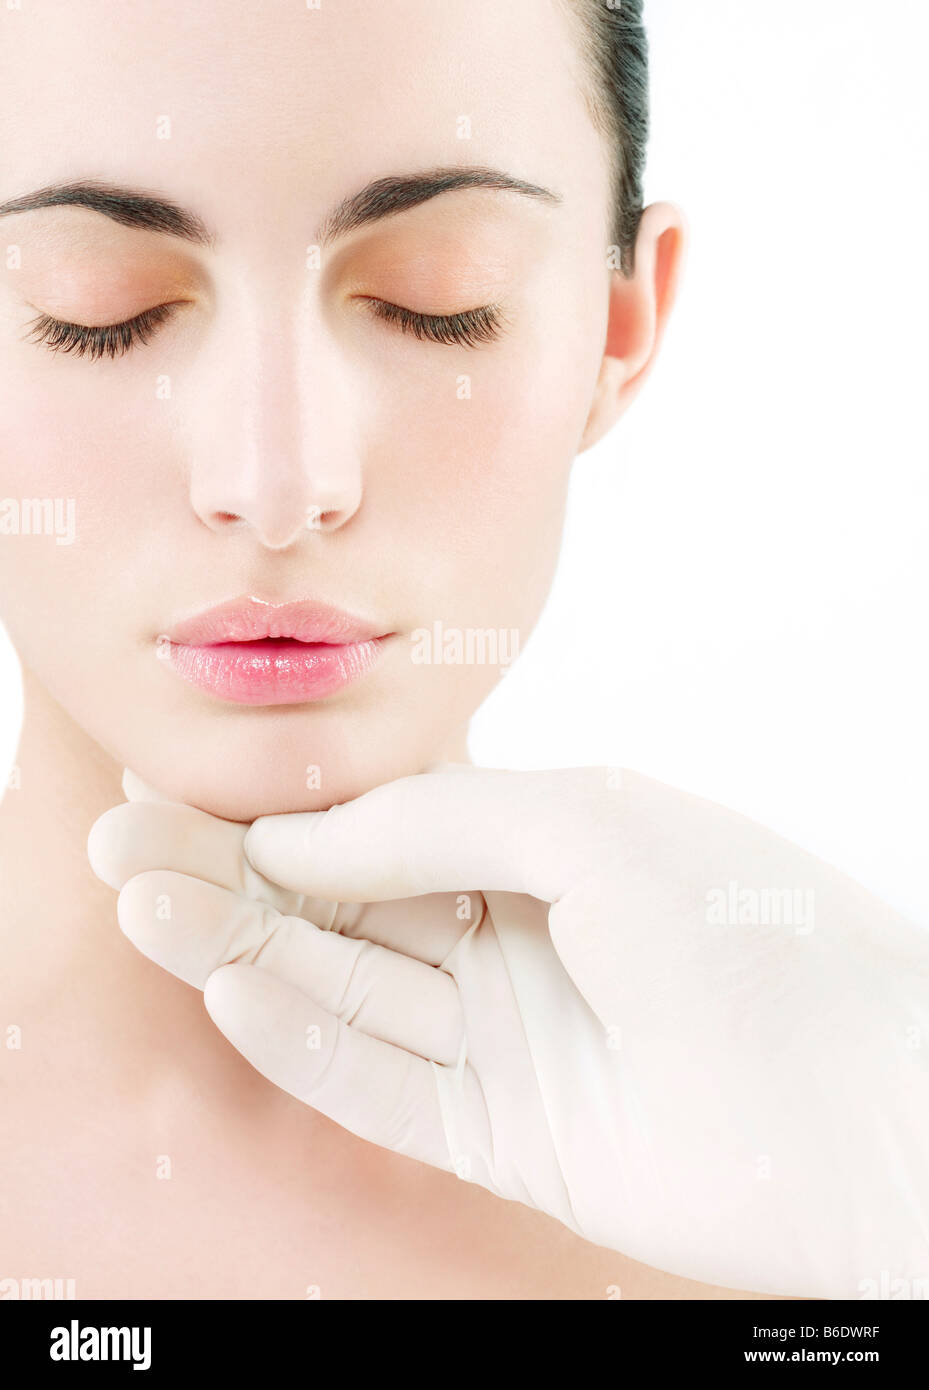 Cosmetic surgery. Conceptual image of cosmetic surgery represented by a gloved hand touching a woman's face. Stock Photo